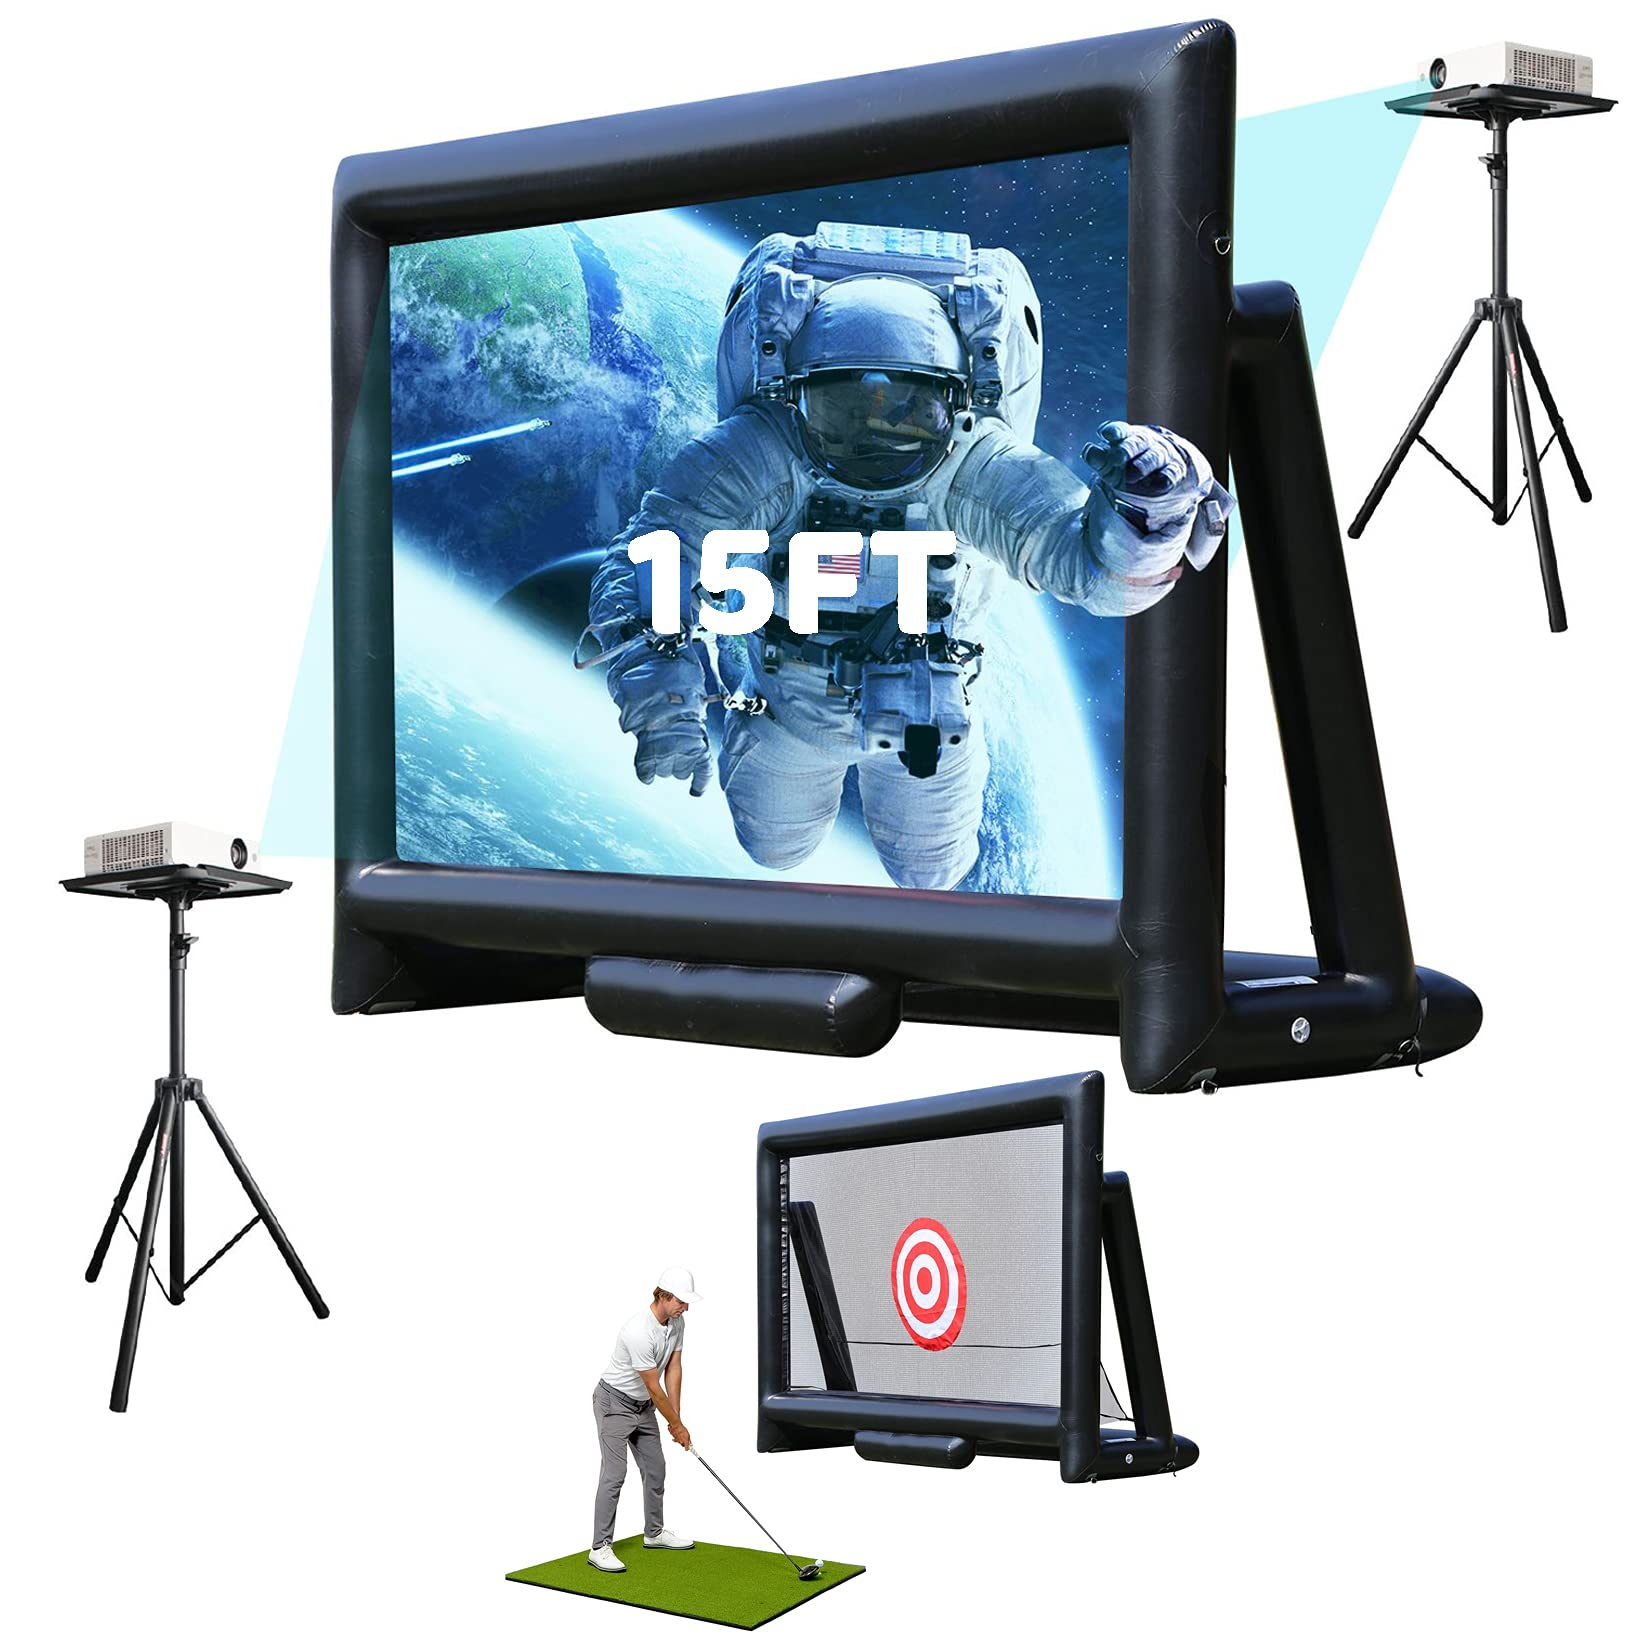 Sewinfla Airtight Movie Screen 15FT Inflatable Golf Practice Net Combination, Support Front & Rear Projection, No Need to Keep Inflating